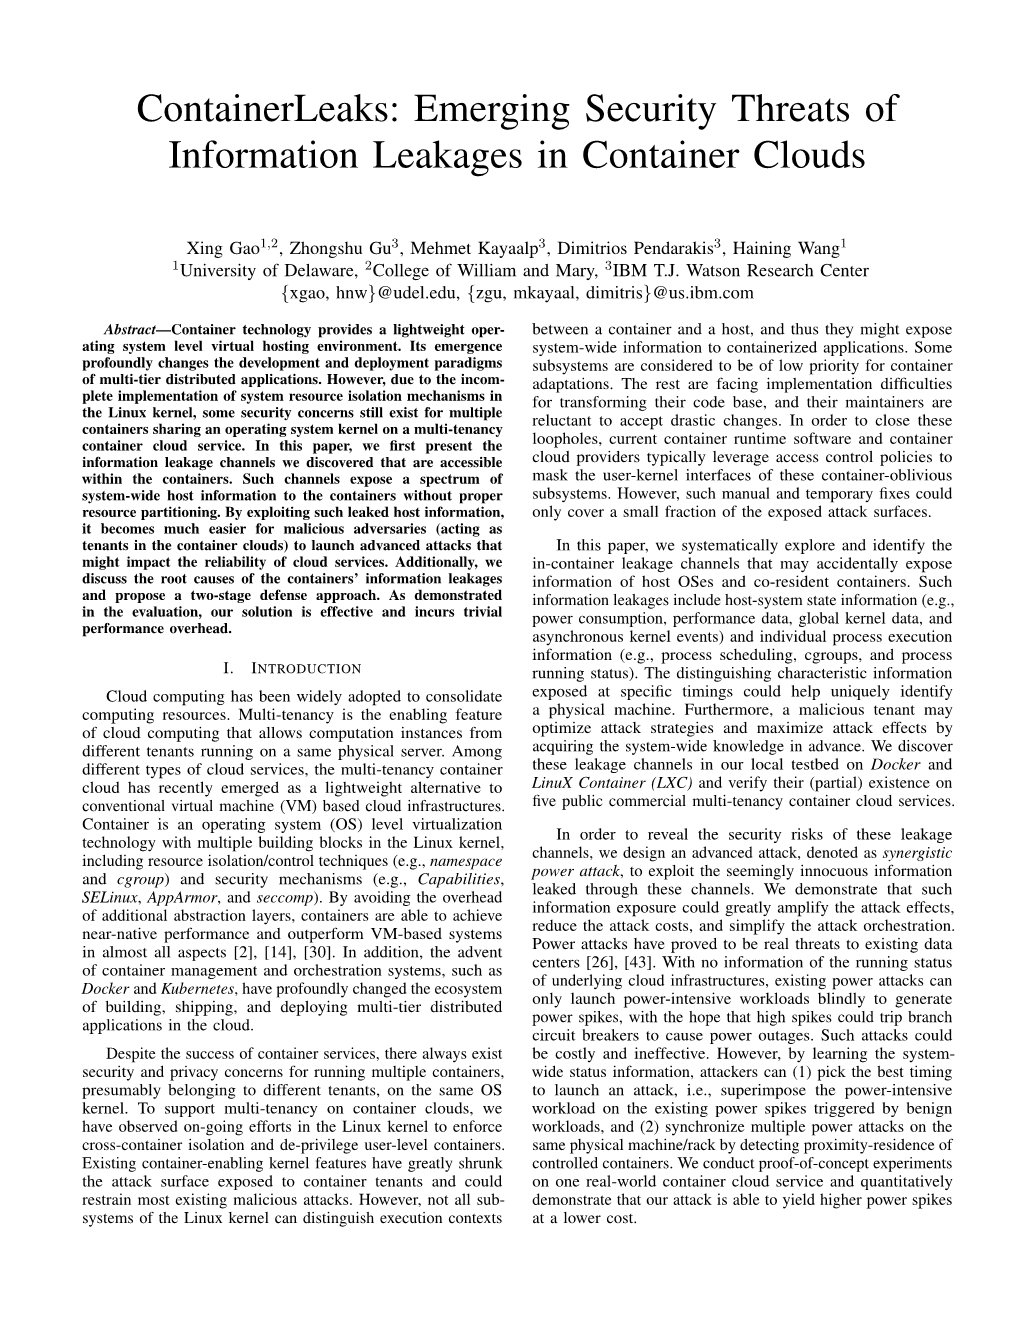 Emerging Security Threats of Information Leakages in Container Clouds